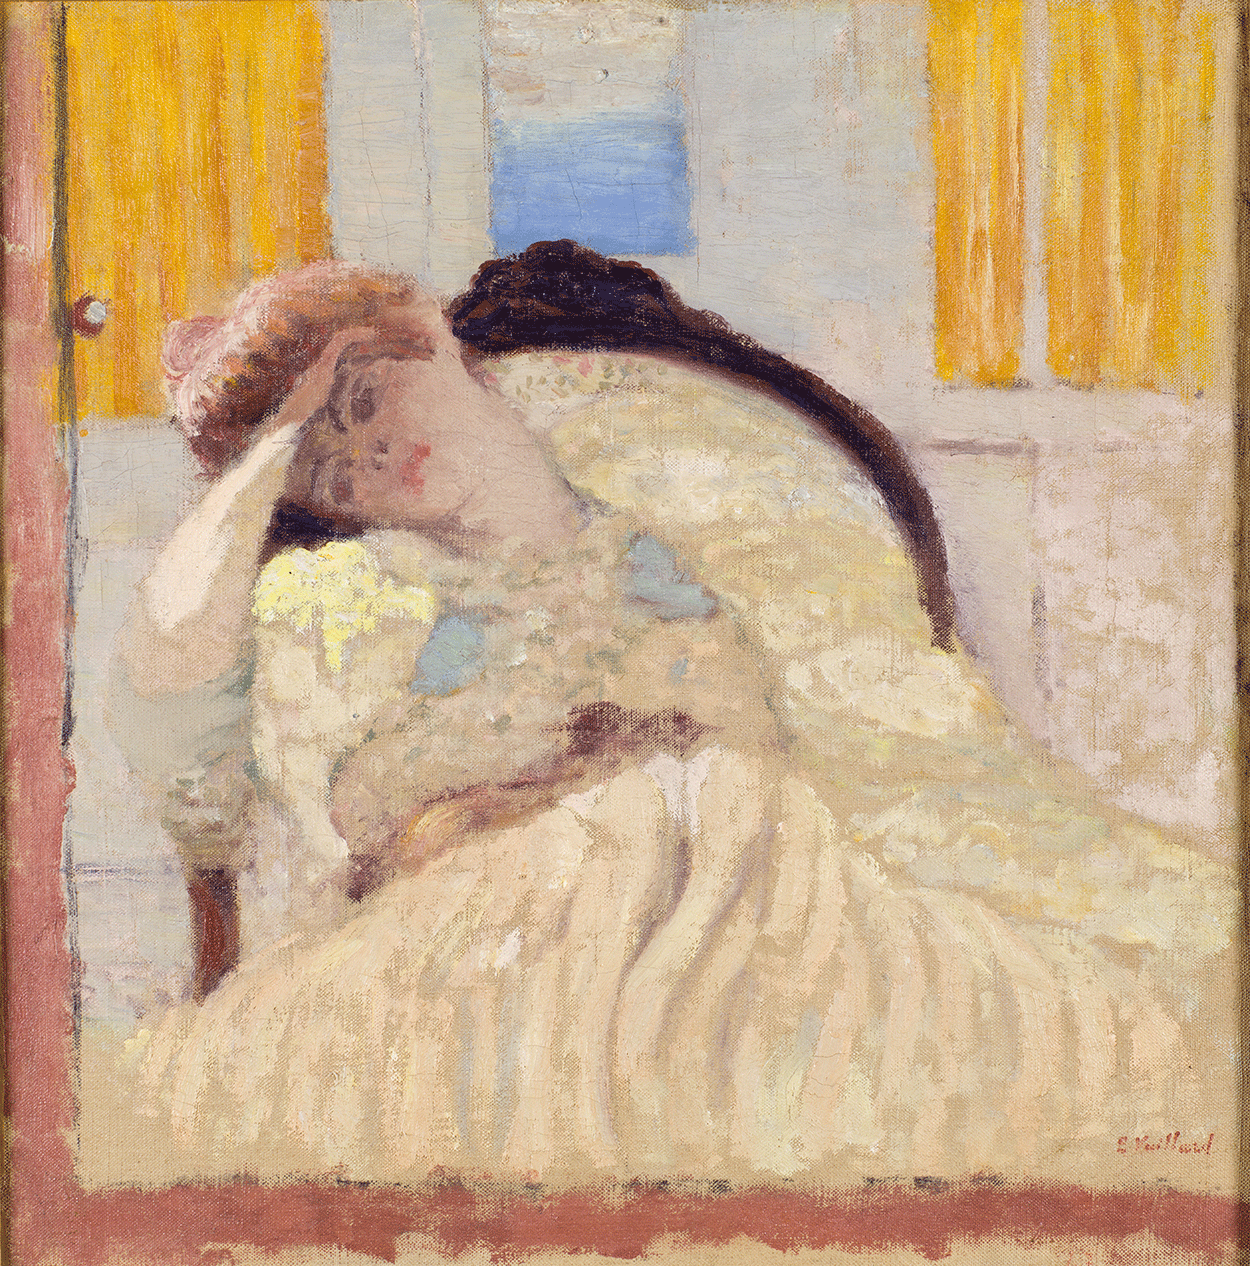 Misia Seated in an Armchair also known as Affecting Nonchalance by Édouard Vuillard - 1901 - 44,2 × 43,3 cm Musée Bonnard